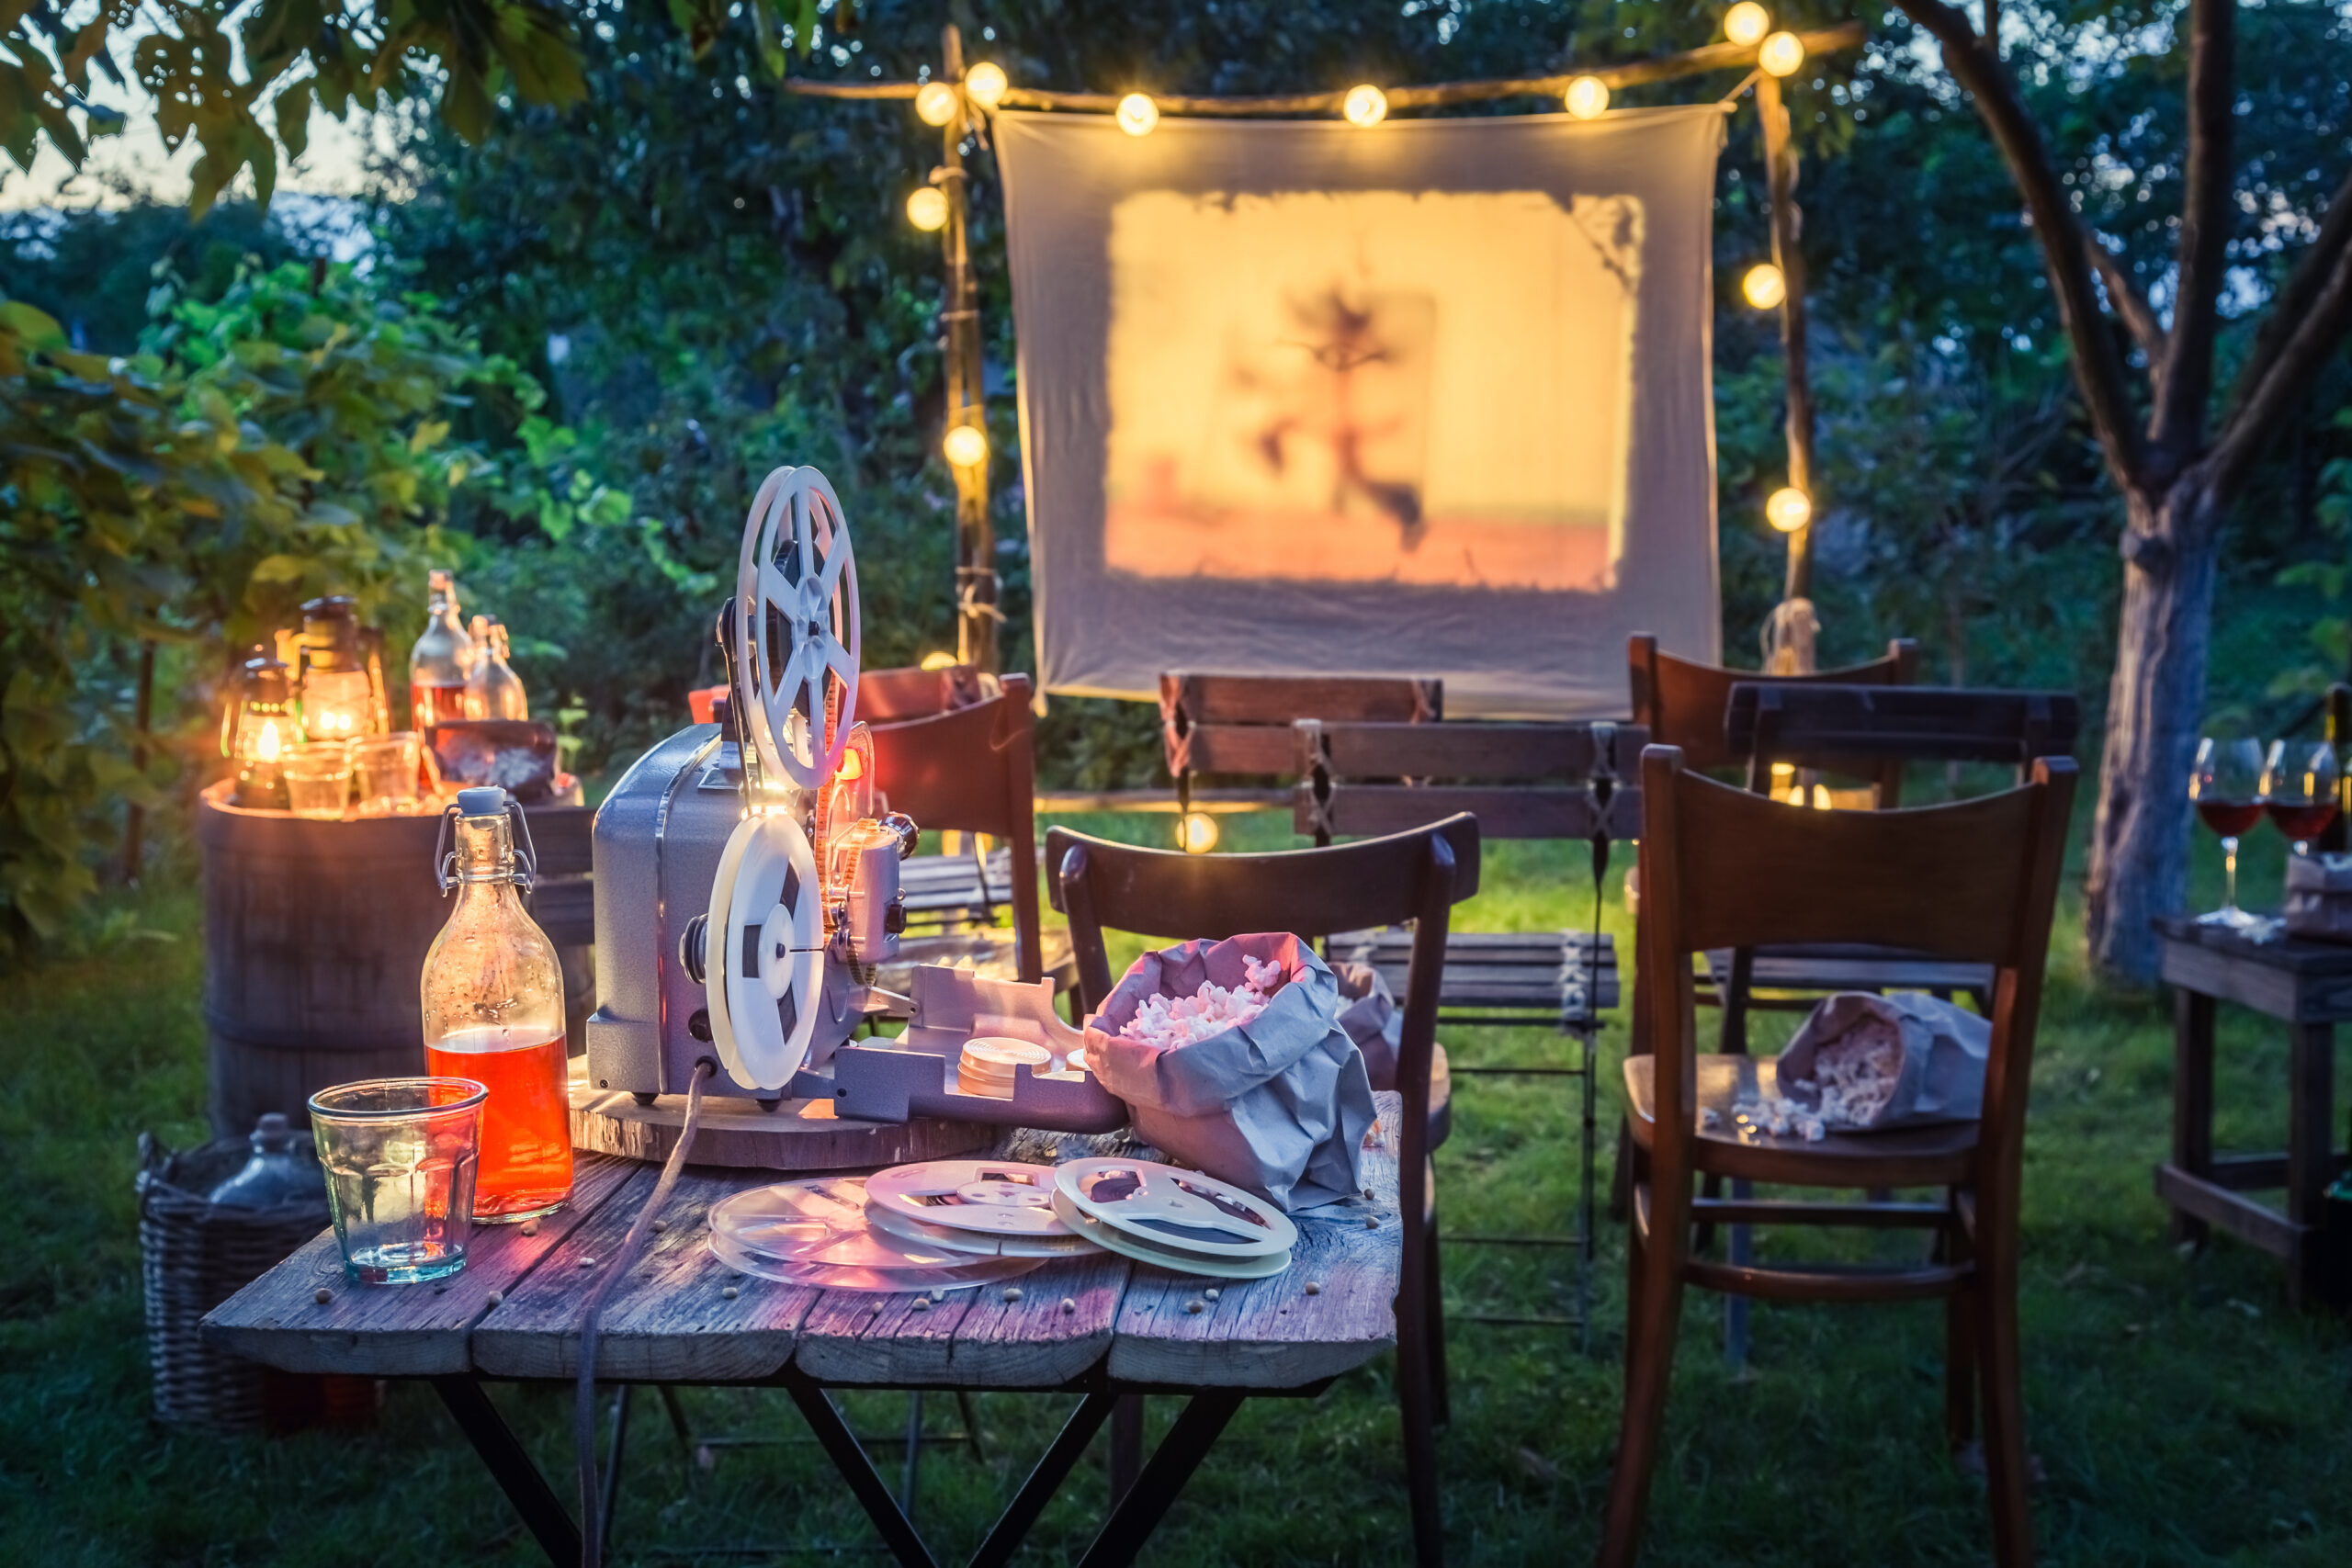 How to Have the Best Outdoor Movie Experience